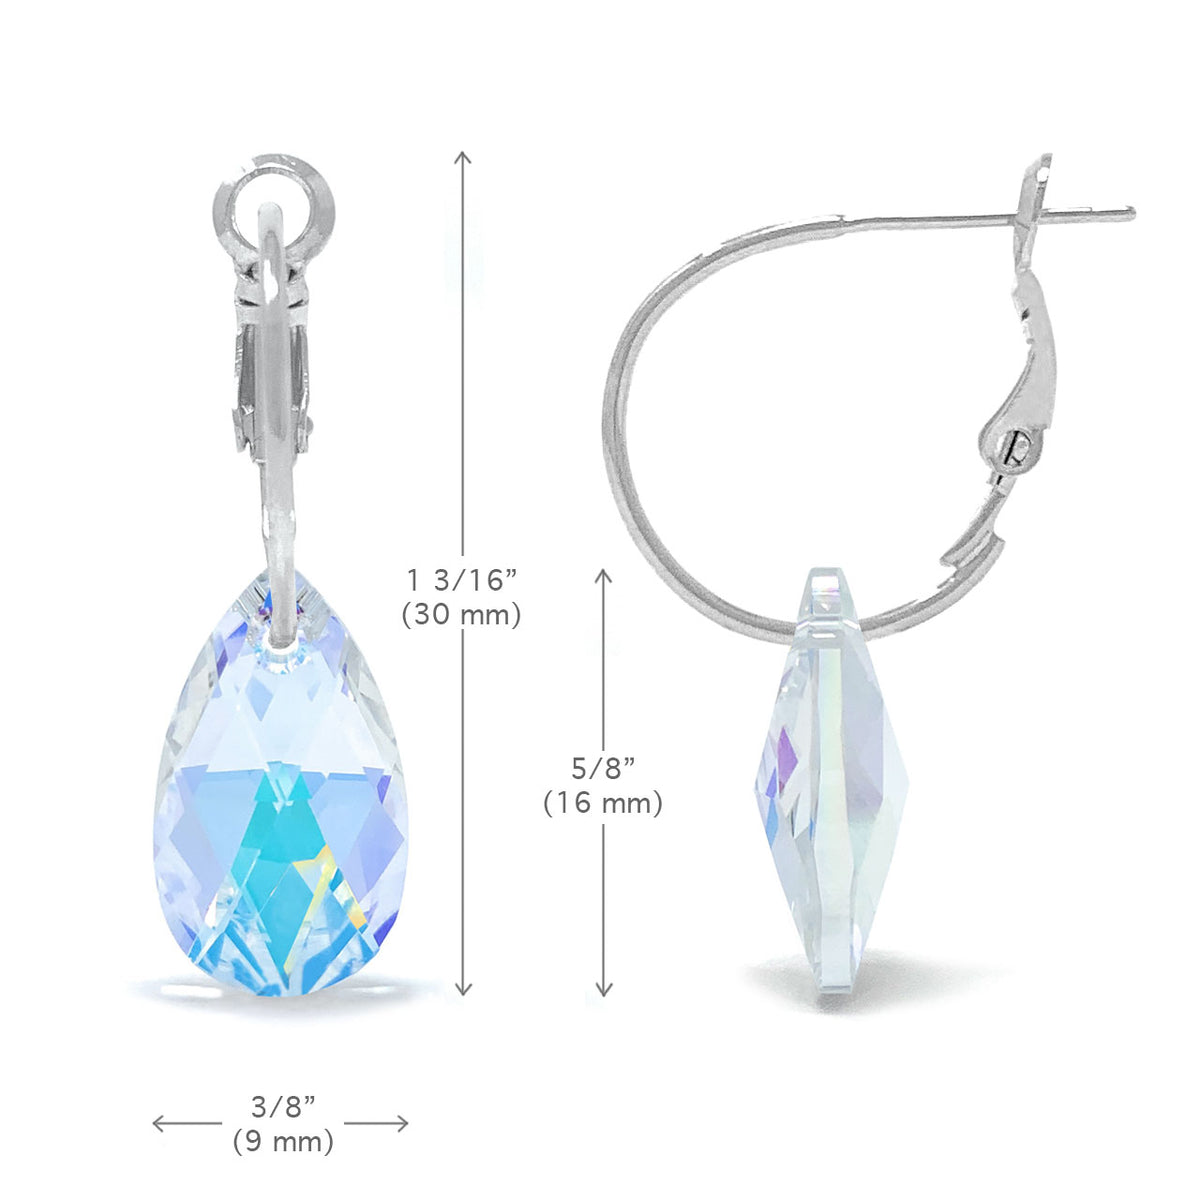 Aurora Small Drop Earrings with Clear Multicolor Aurore Boreale Pear Crystals from Swarovski Silver Toned Rhodium Plated - Ed Heart